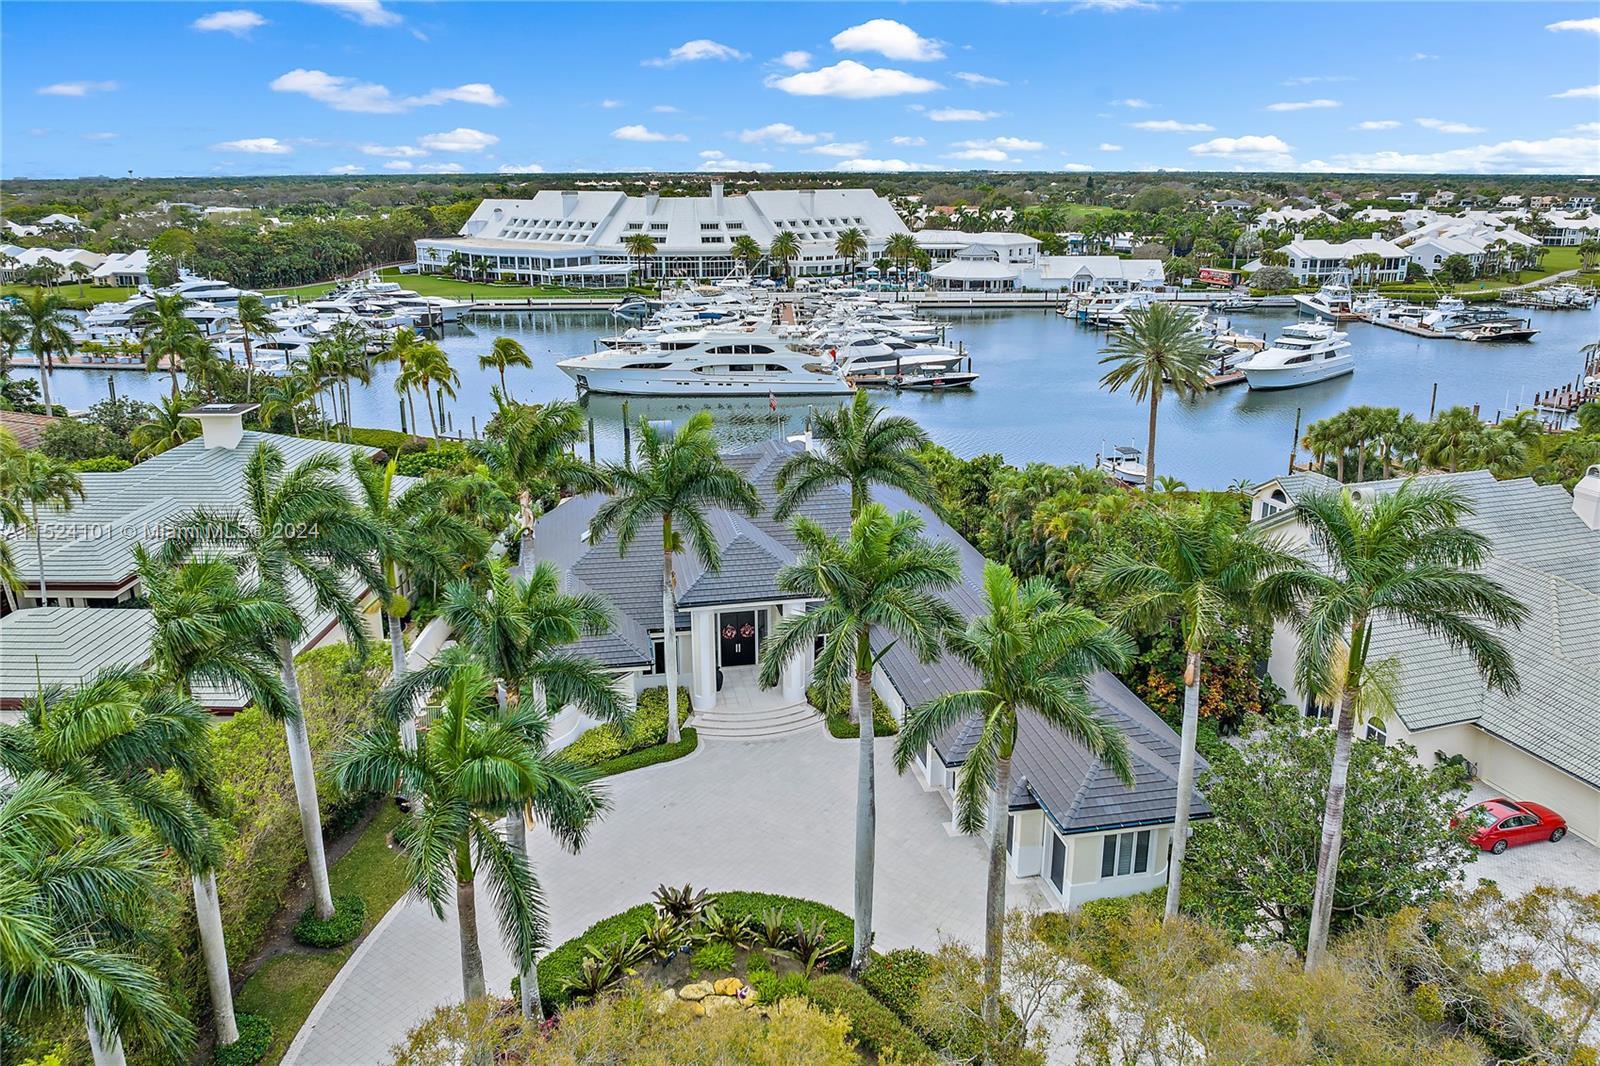 Spectacular Admirals Cove Estate Home on the Spyglass Lane cul-de-sac has a captivating view of the 